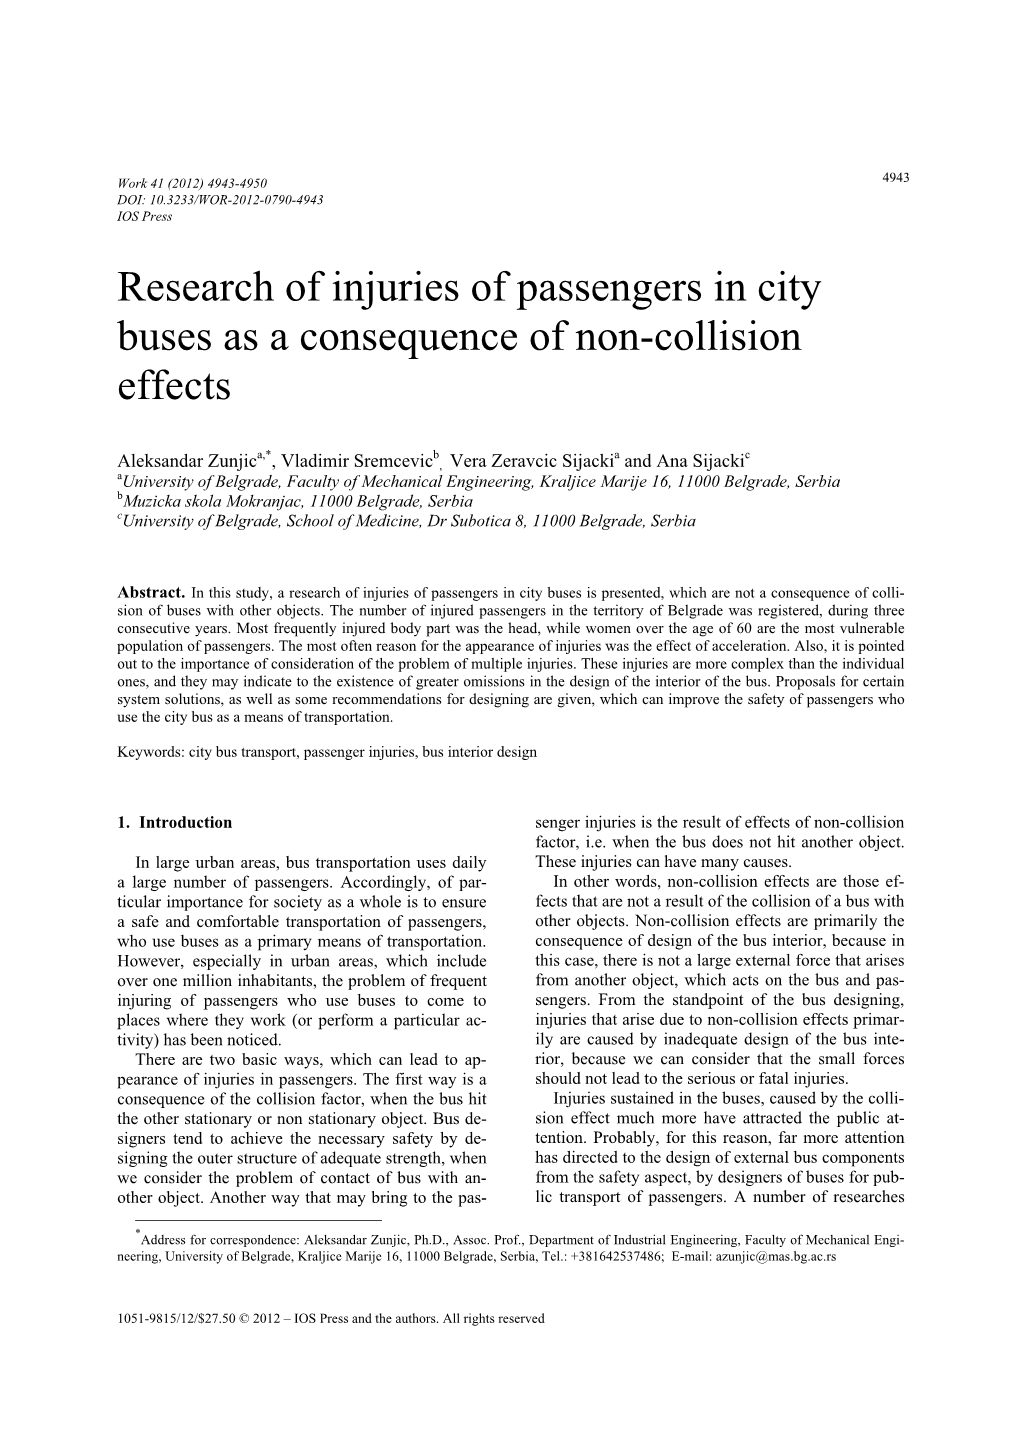 Research of Injuries of Passengers in City Buses As a Consequence of Non-Collision Effects